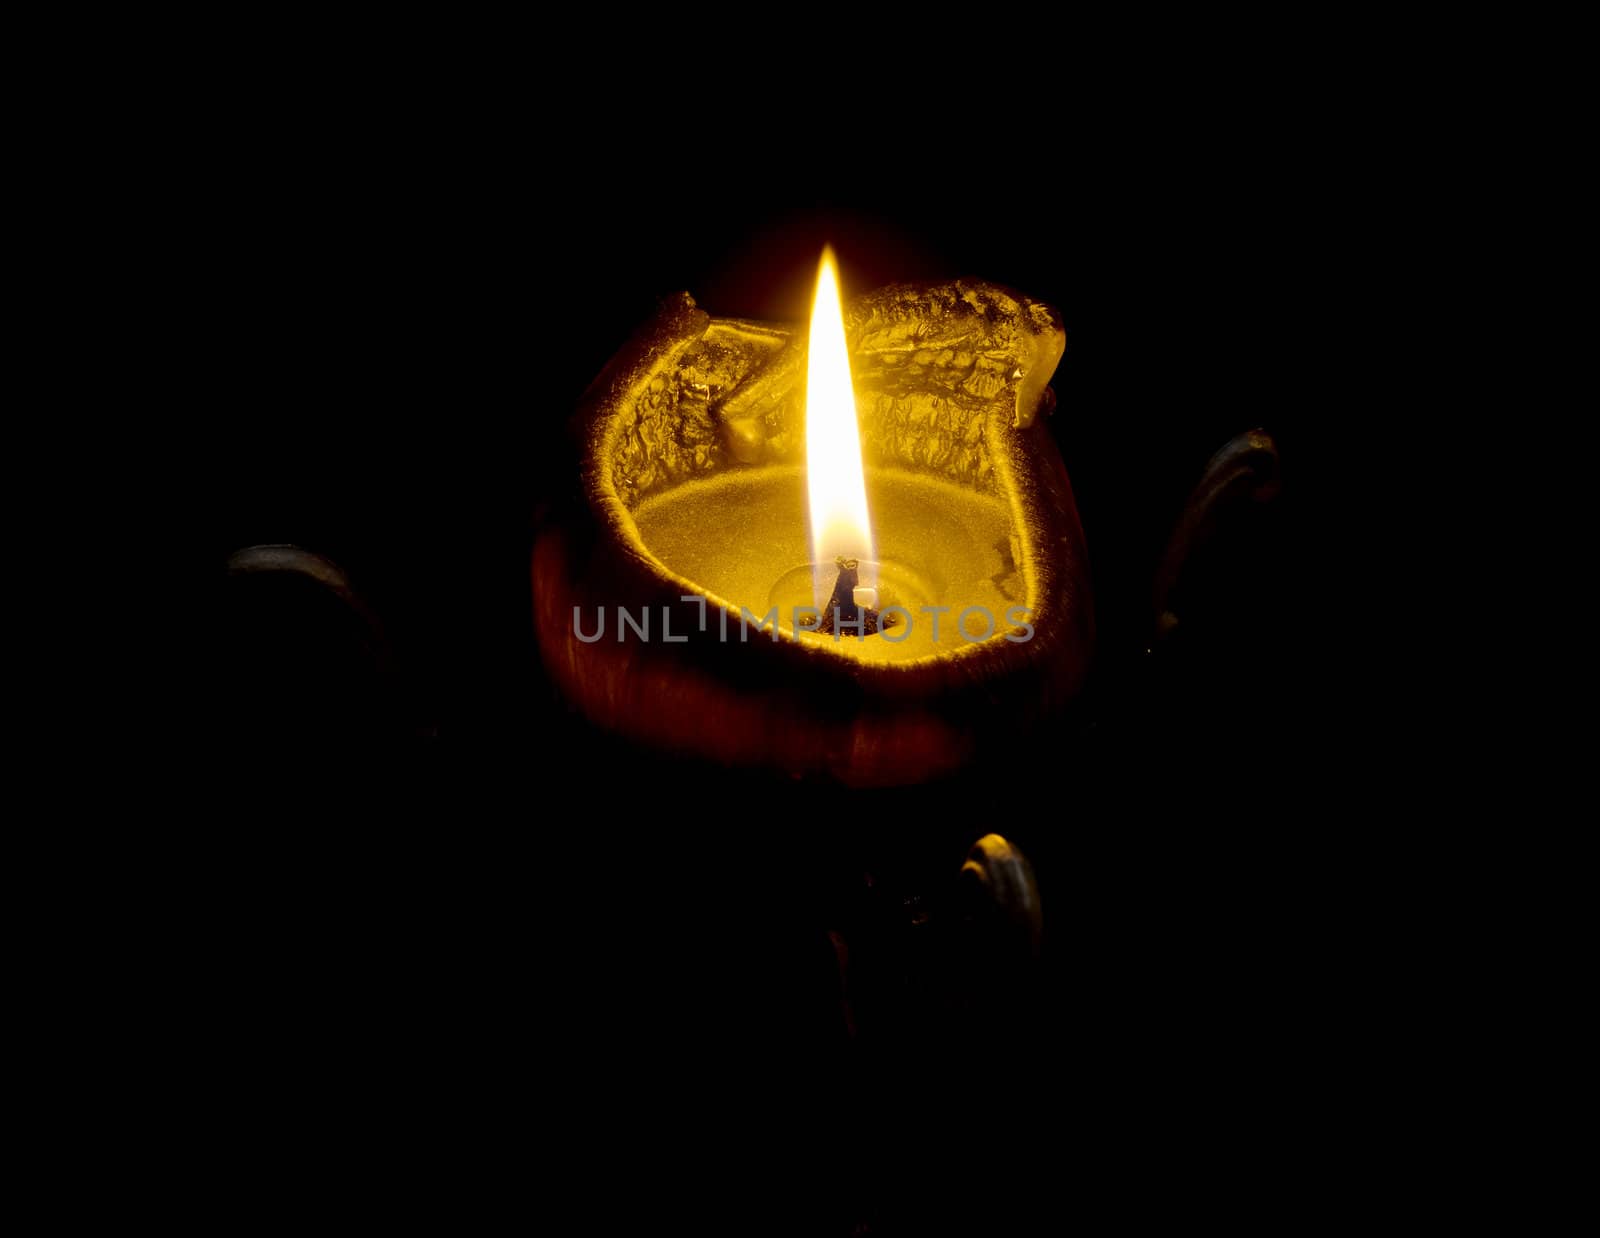 Black candle by nprause